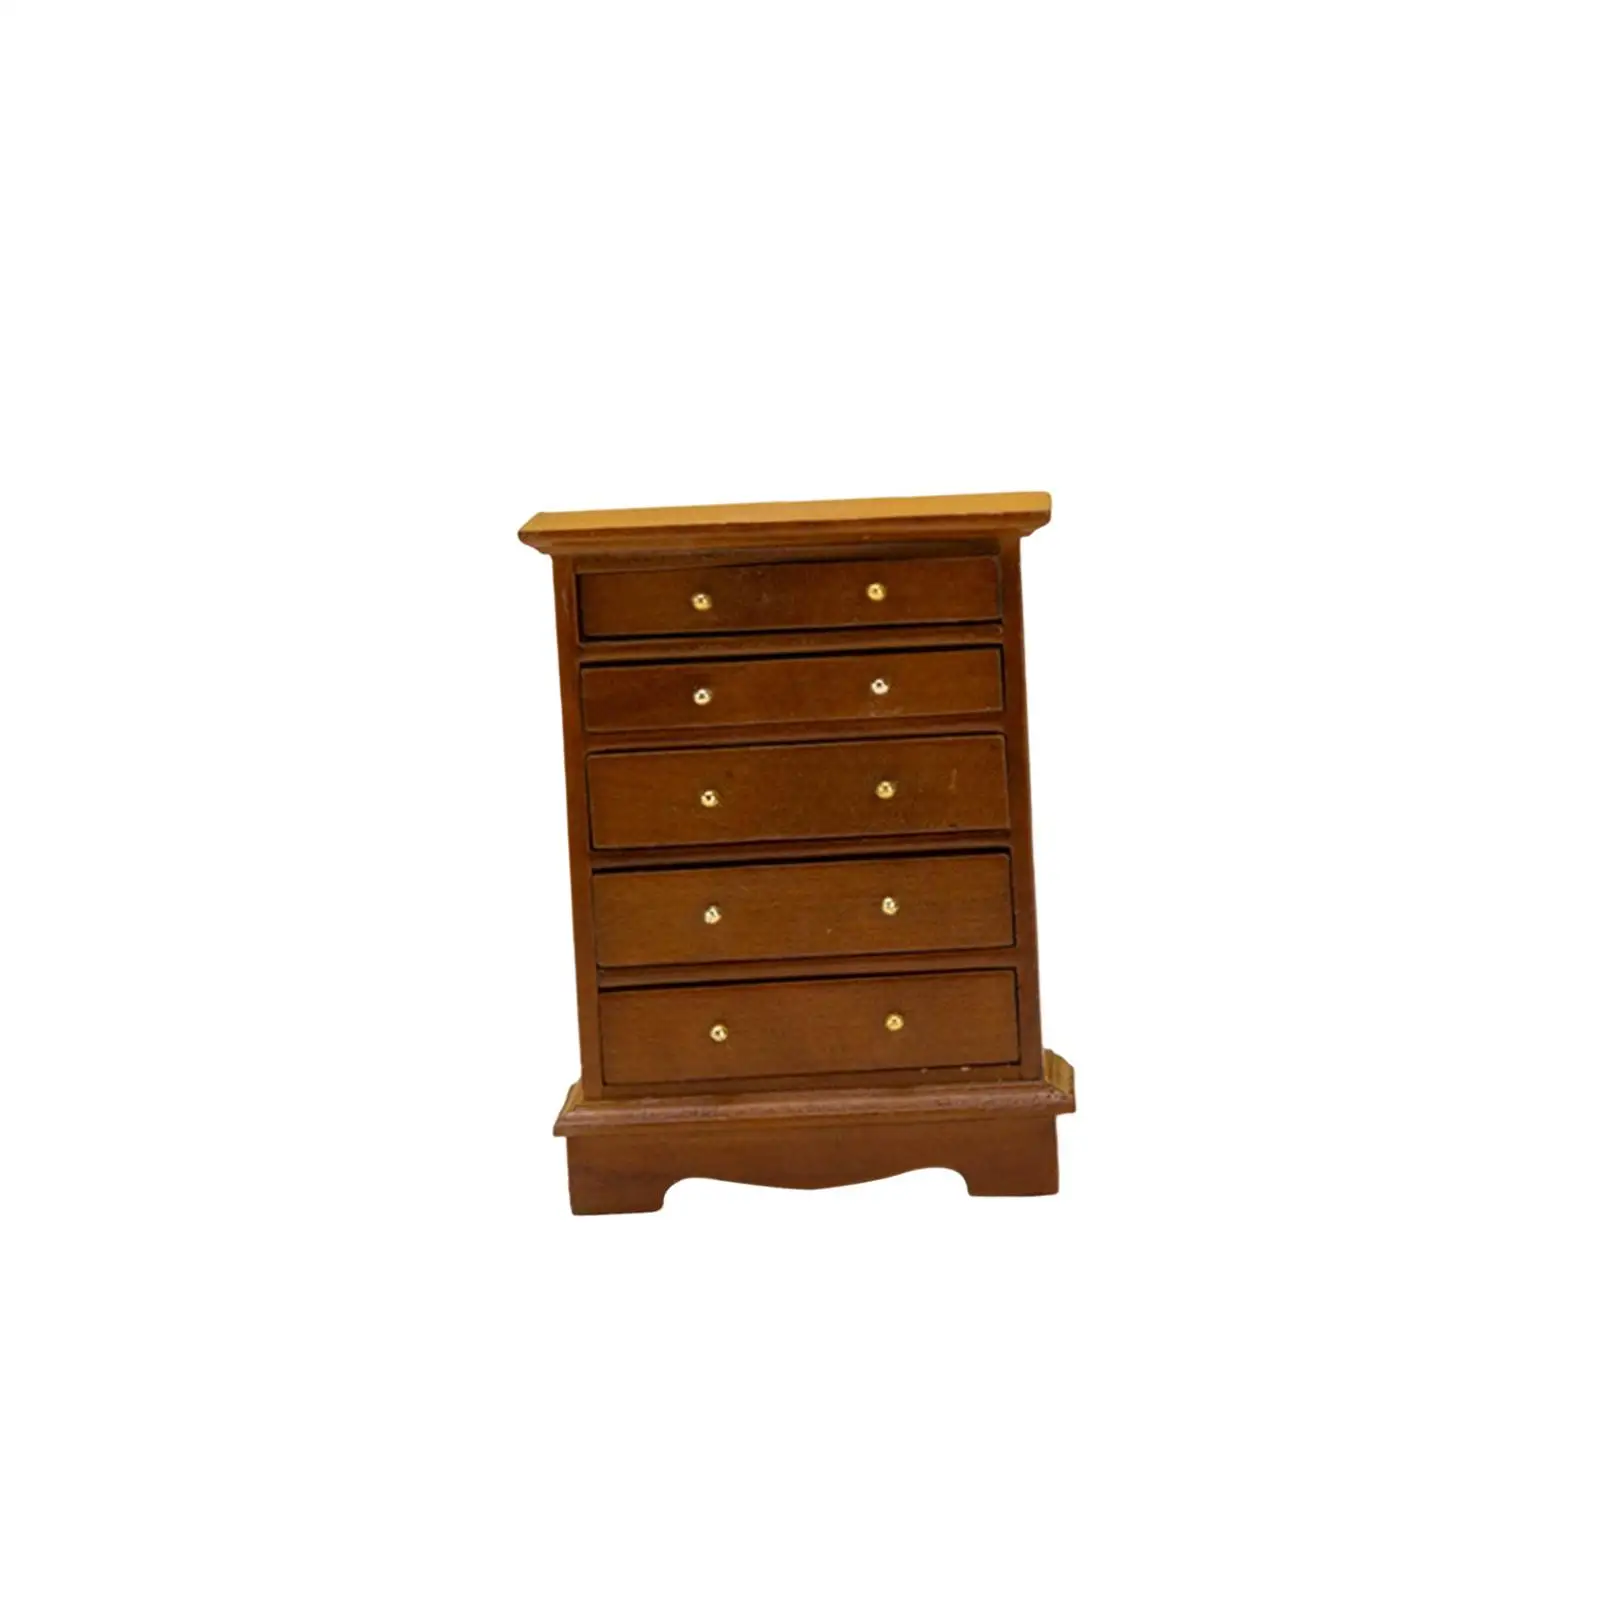 1:12 Dollhouse 5 Drawers Cabinet Model Simulation Wood Furniture Model Delicate Doll House Accessories for Living Room